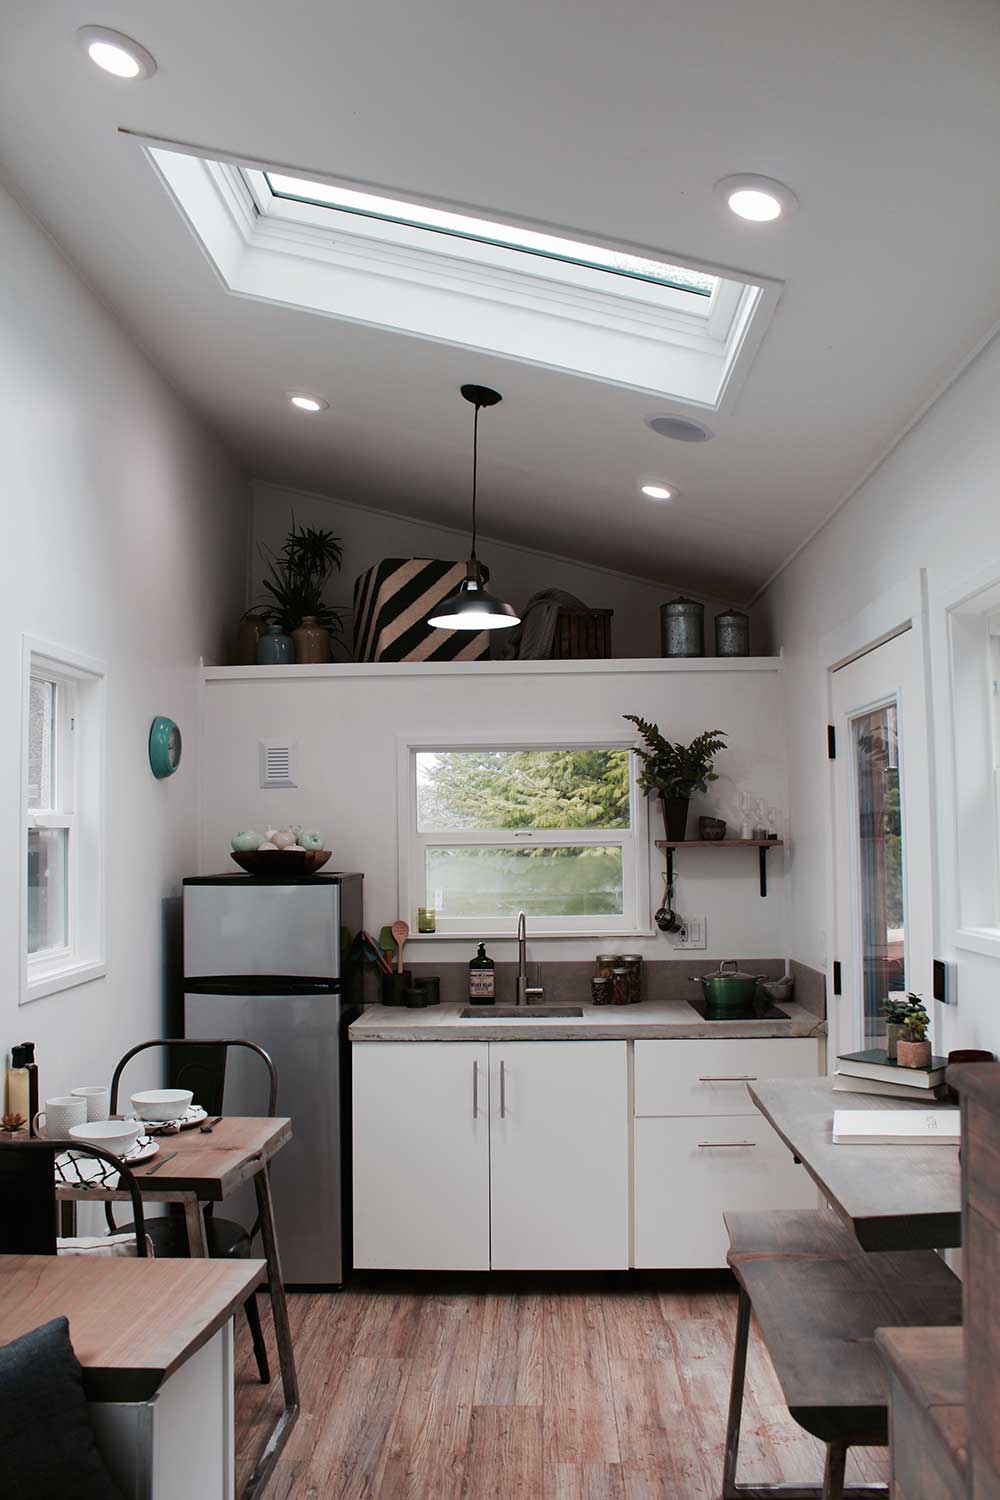 Kitchen, loft and skylight in an elegant custom tiny home designed and built by TIny Heirloom